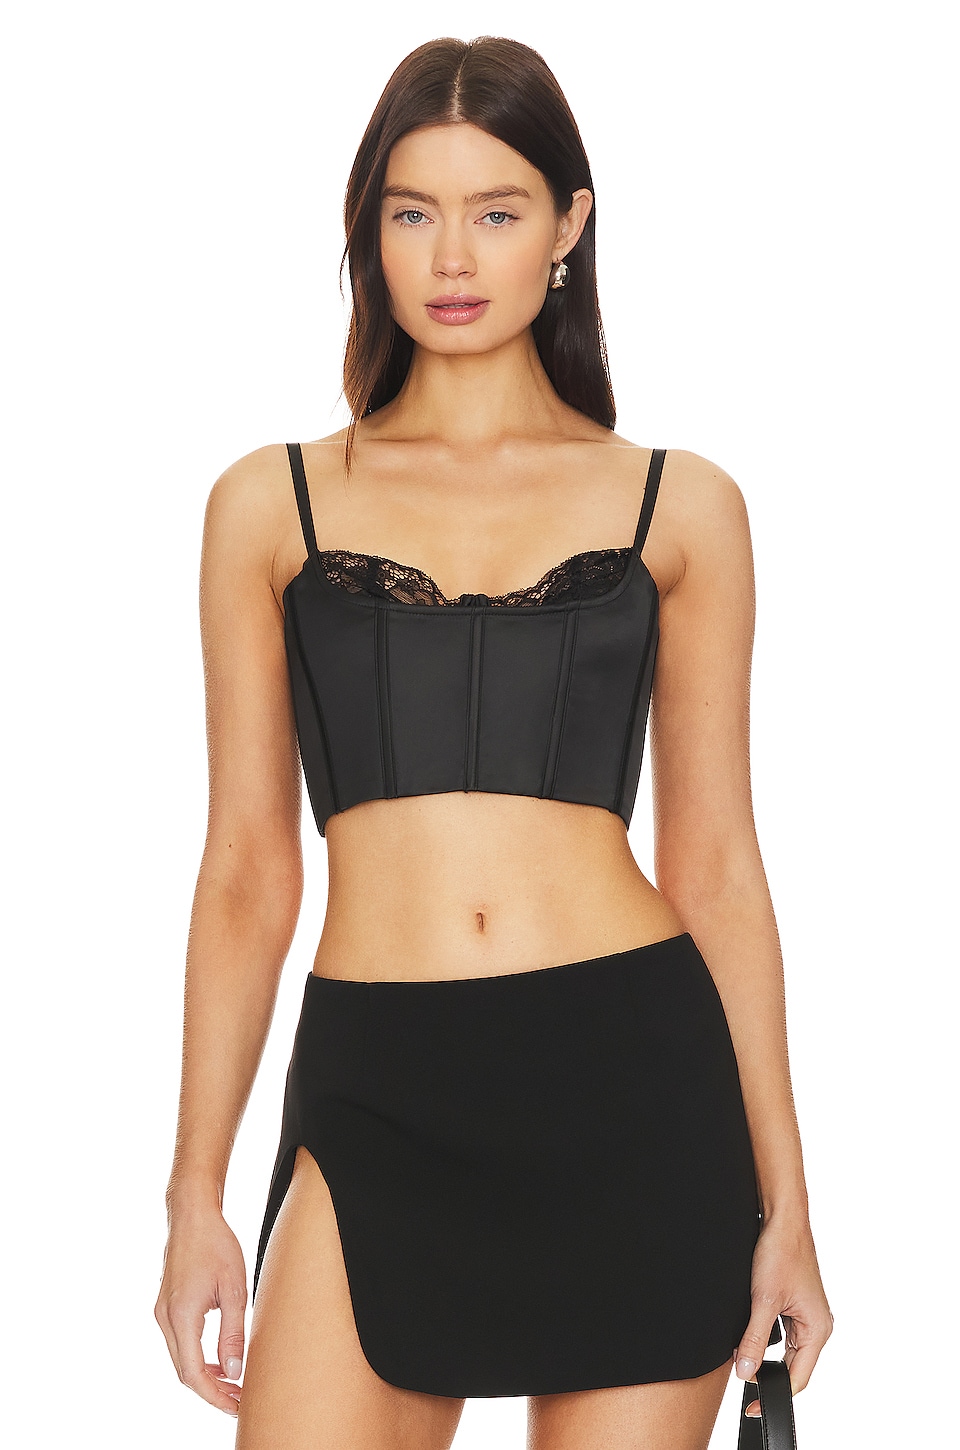 By Dyln Faux Leather Corset Crop Top - Black